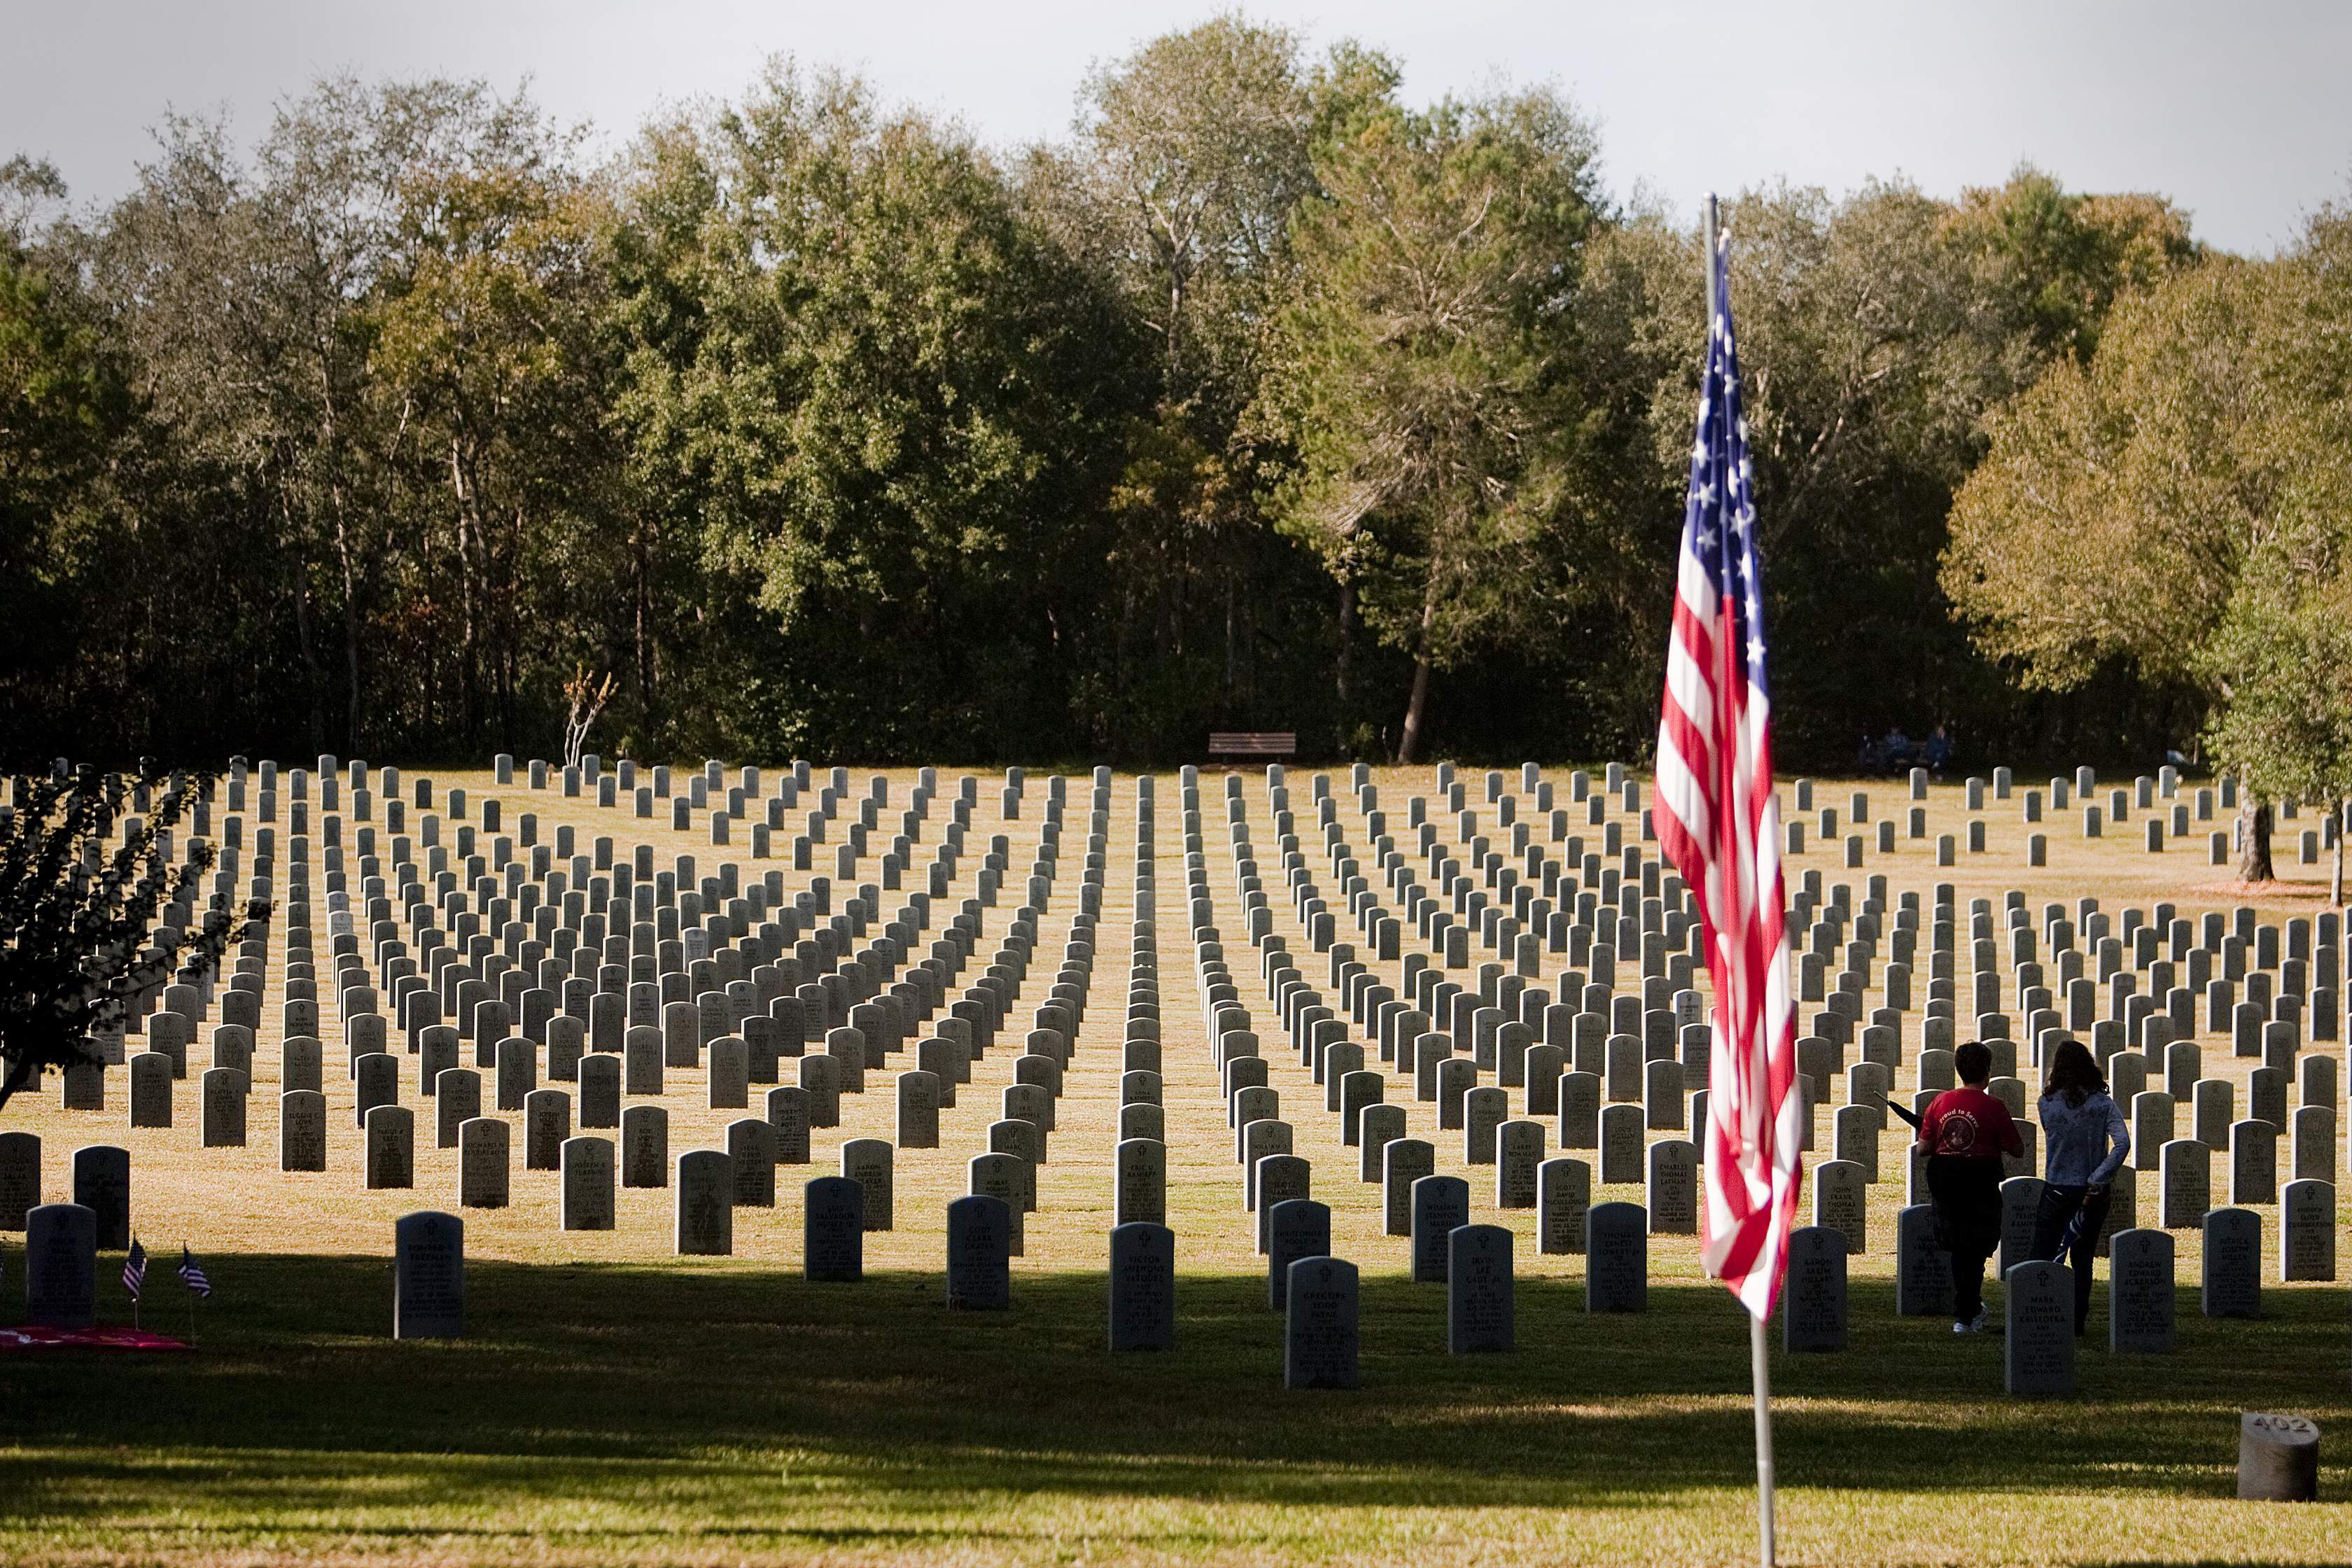 Joe Henderson: Florida National Cemetery, so often passed by, can take a  visitor's breath away